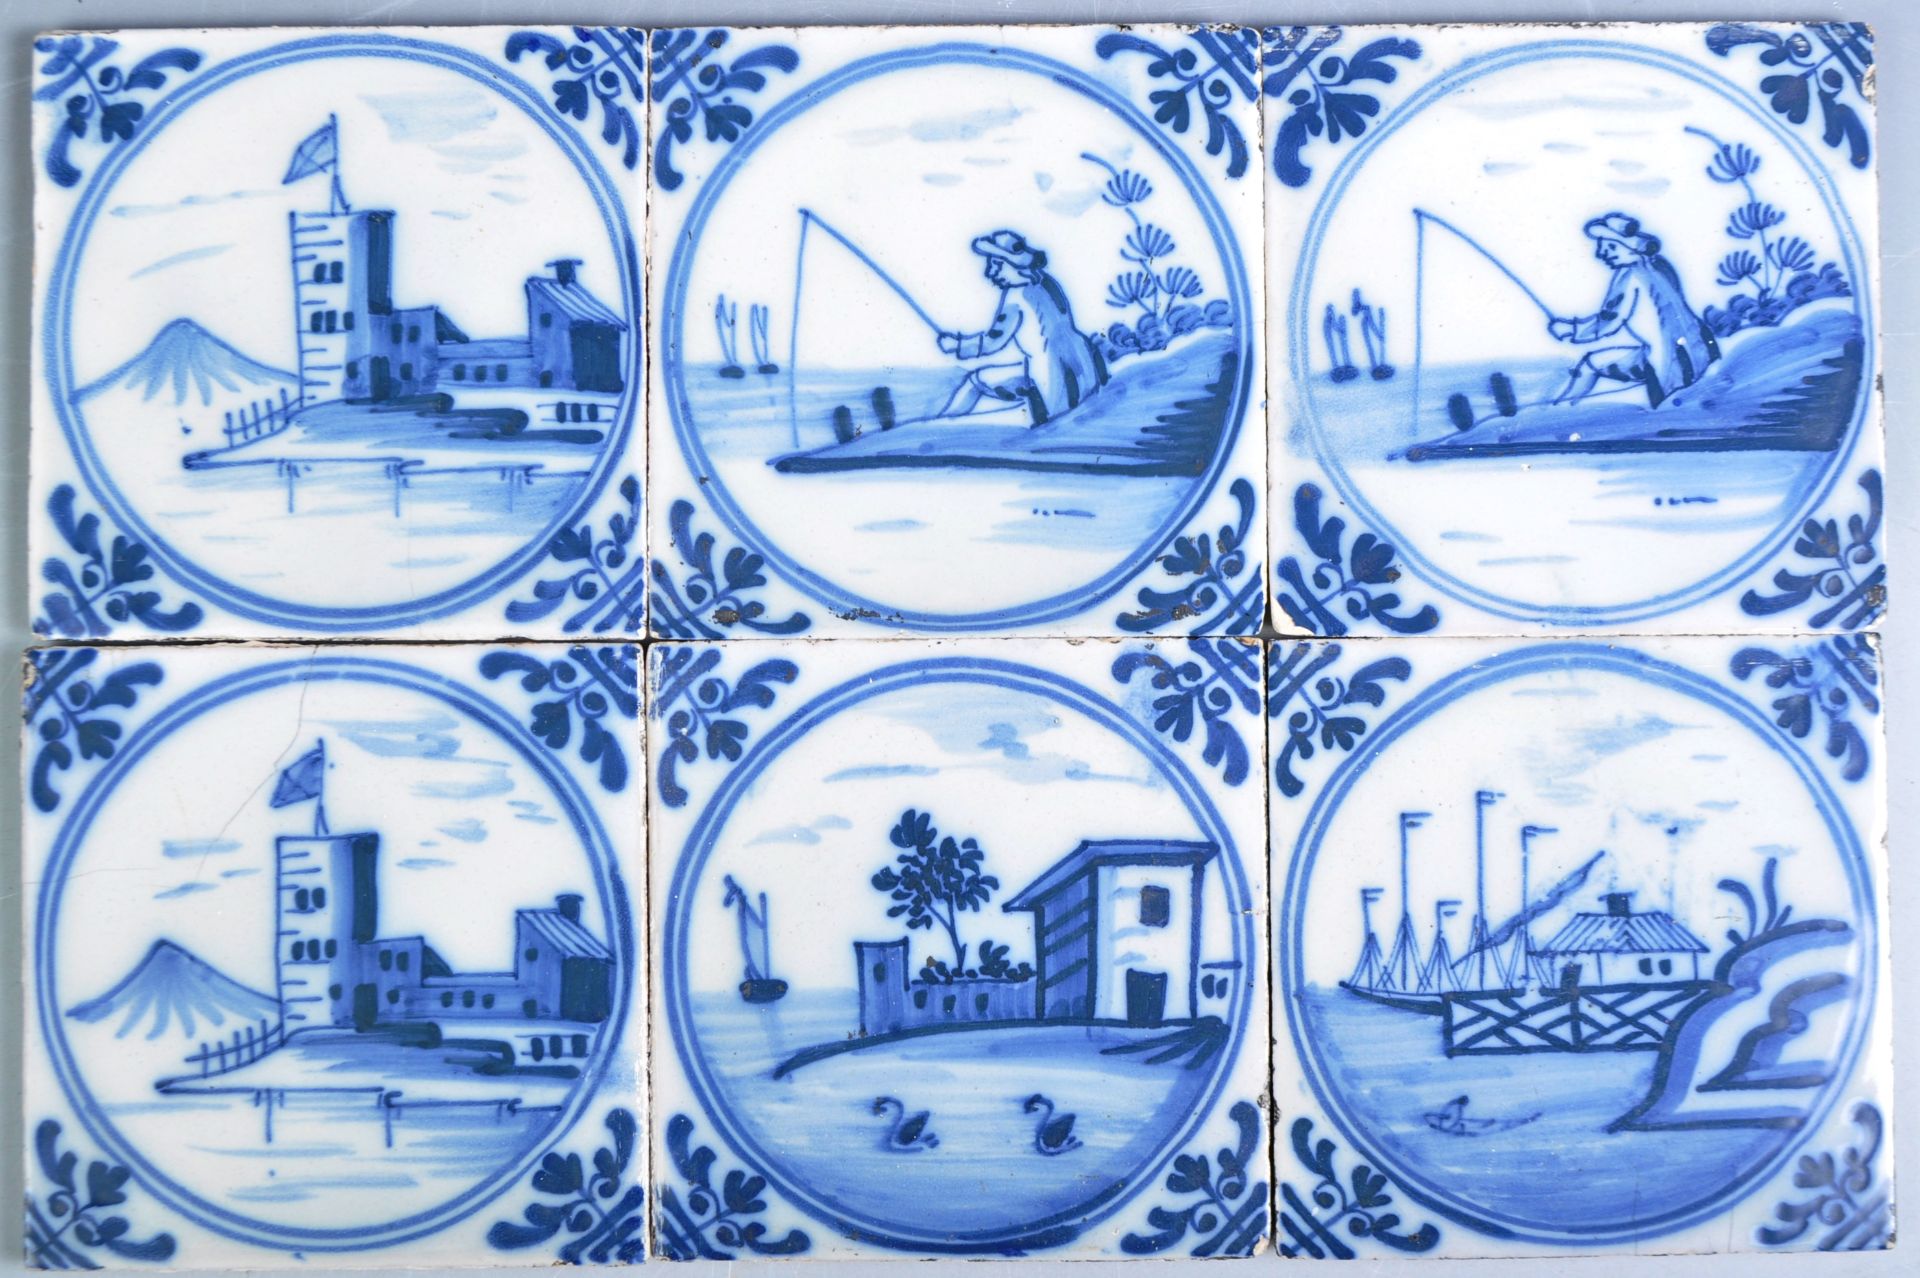 ANTIQUE SET OF 19TH CENTURY DUTCH BLUE AND WHITE TILES